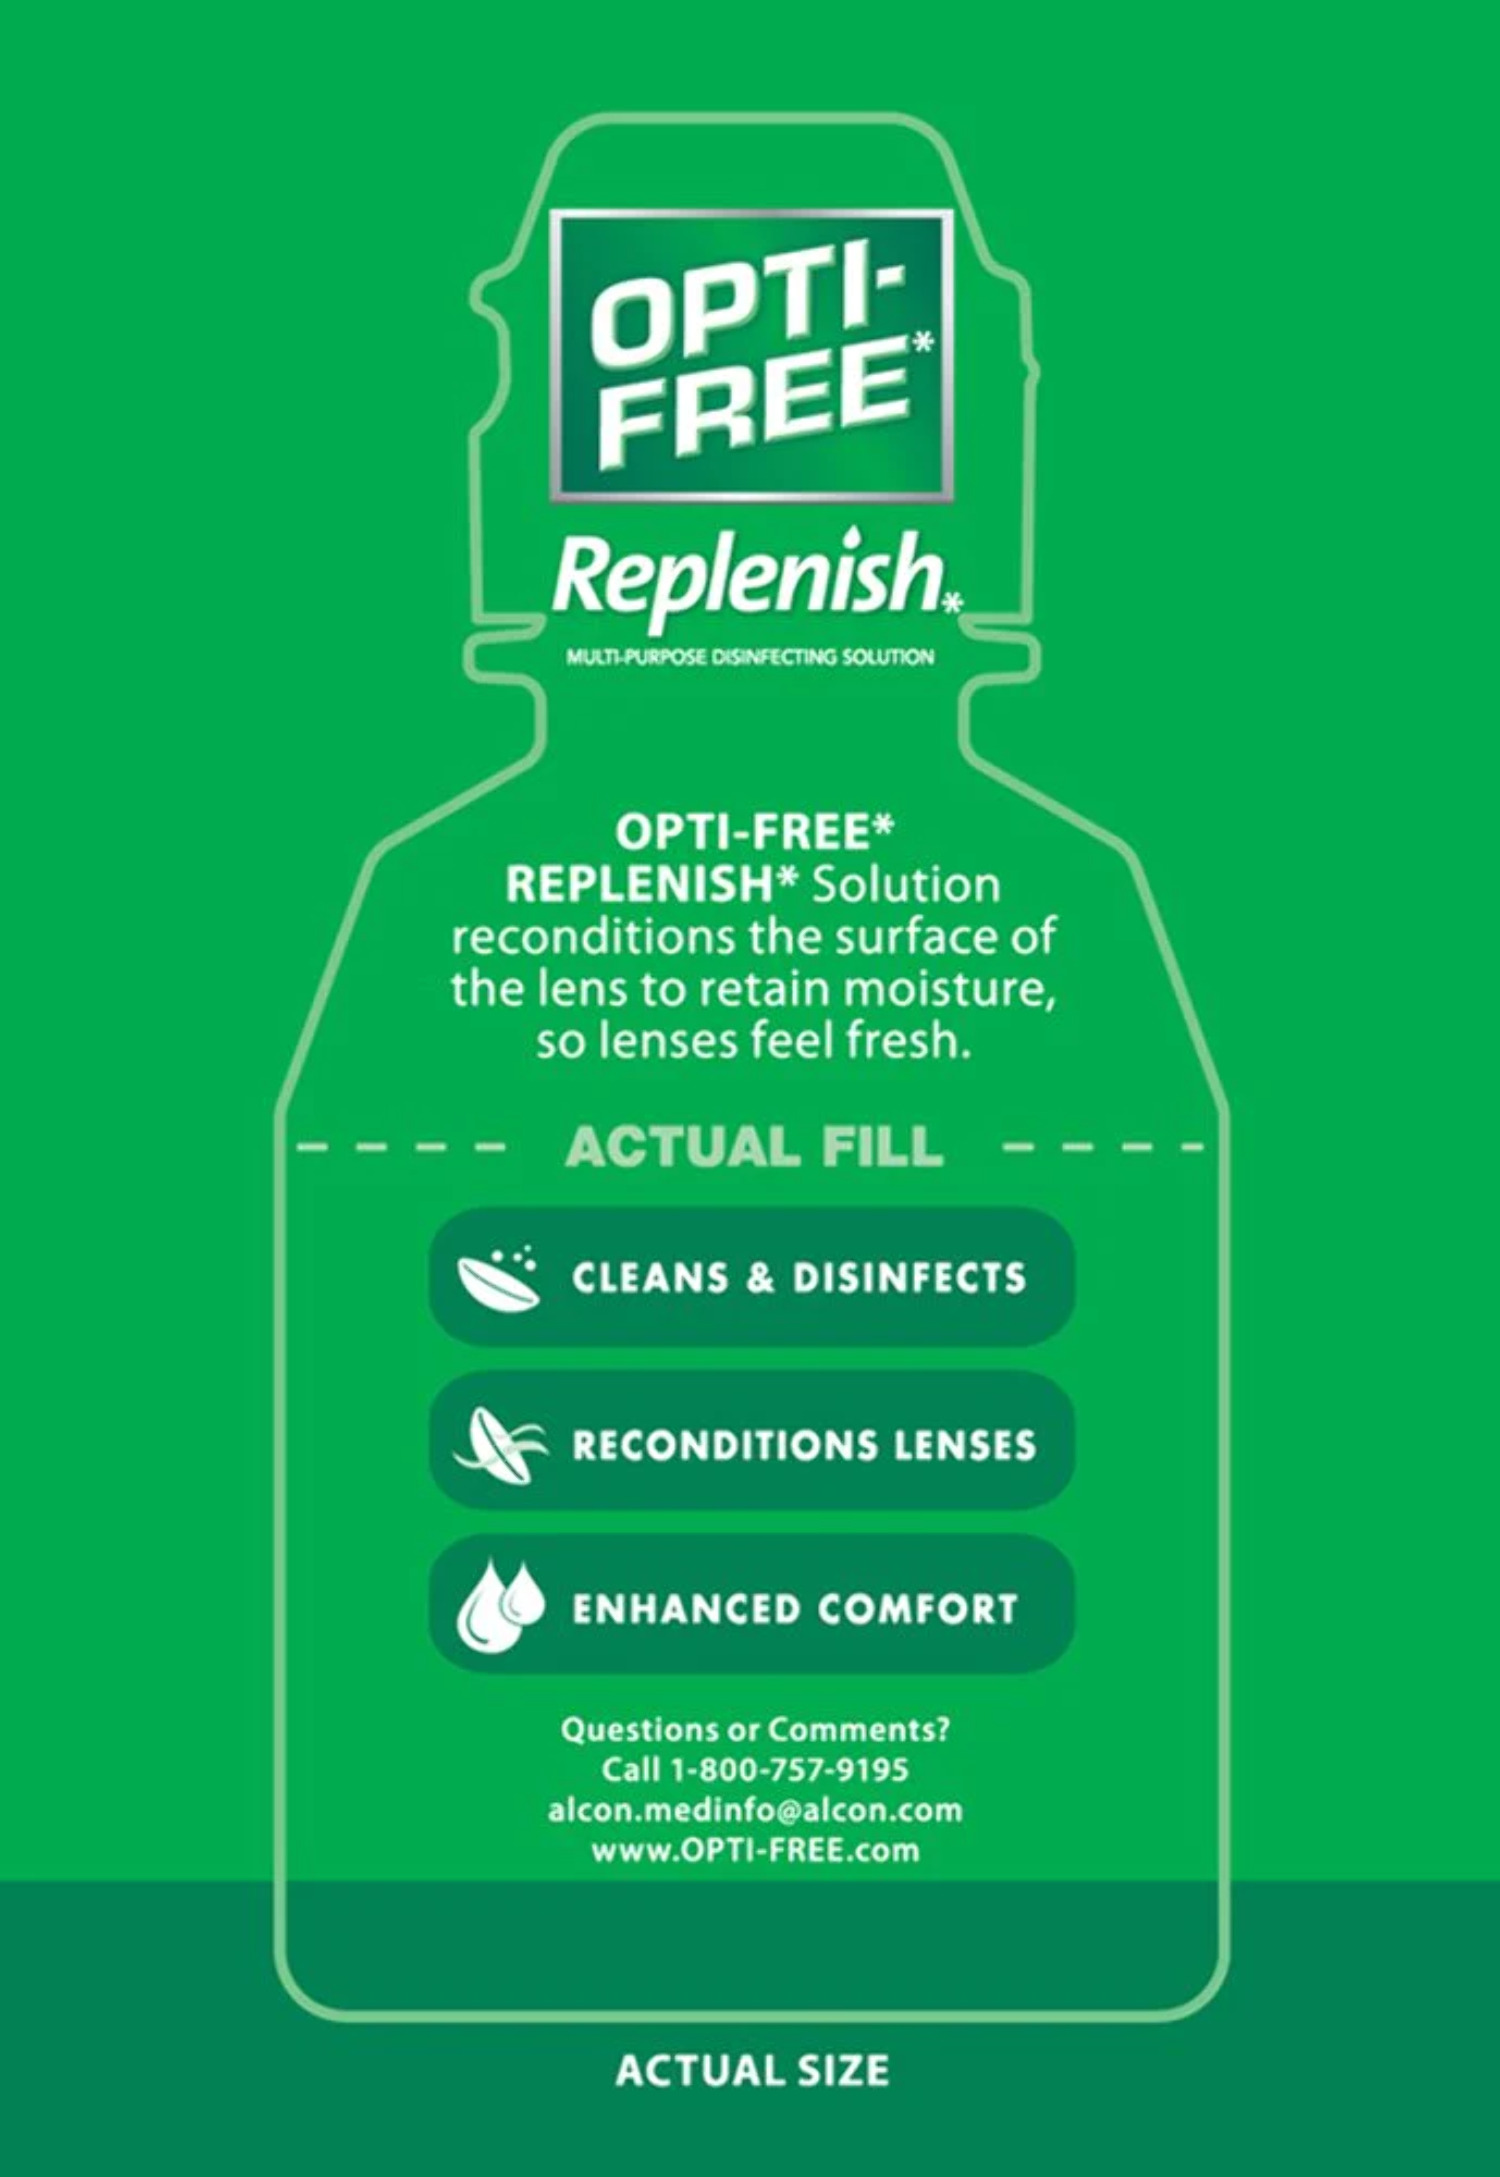 Opti-Free RepleniSH Multi Purpose Disinfecting Solution-2 oz (60 ml), Carry On Size - image 3 of 6